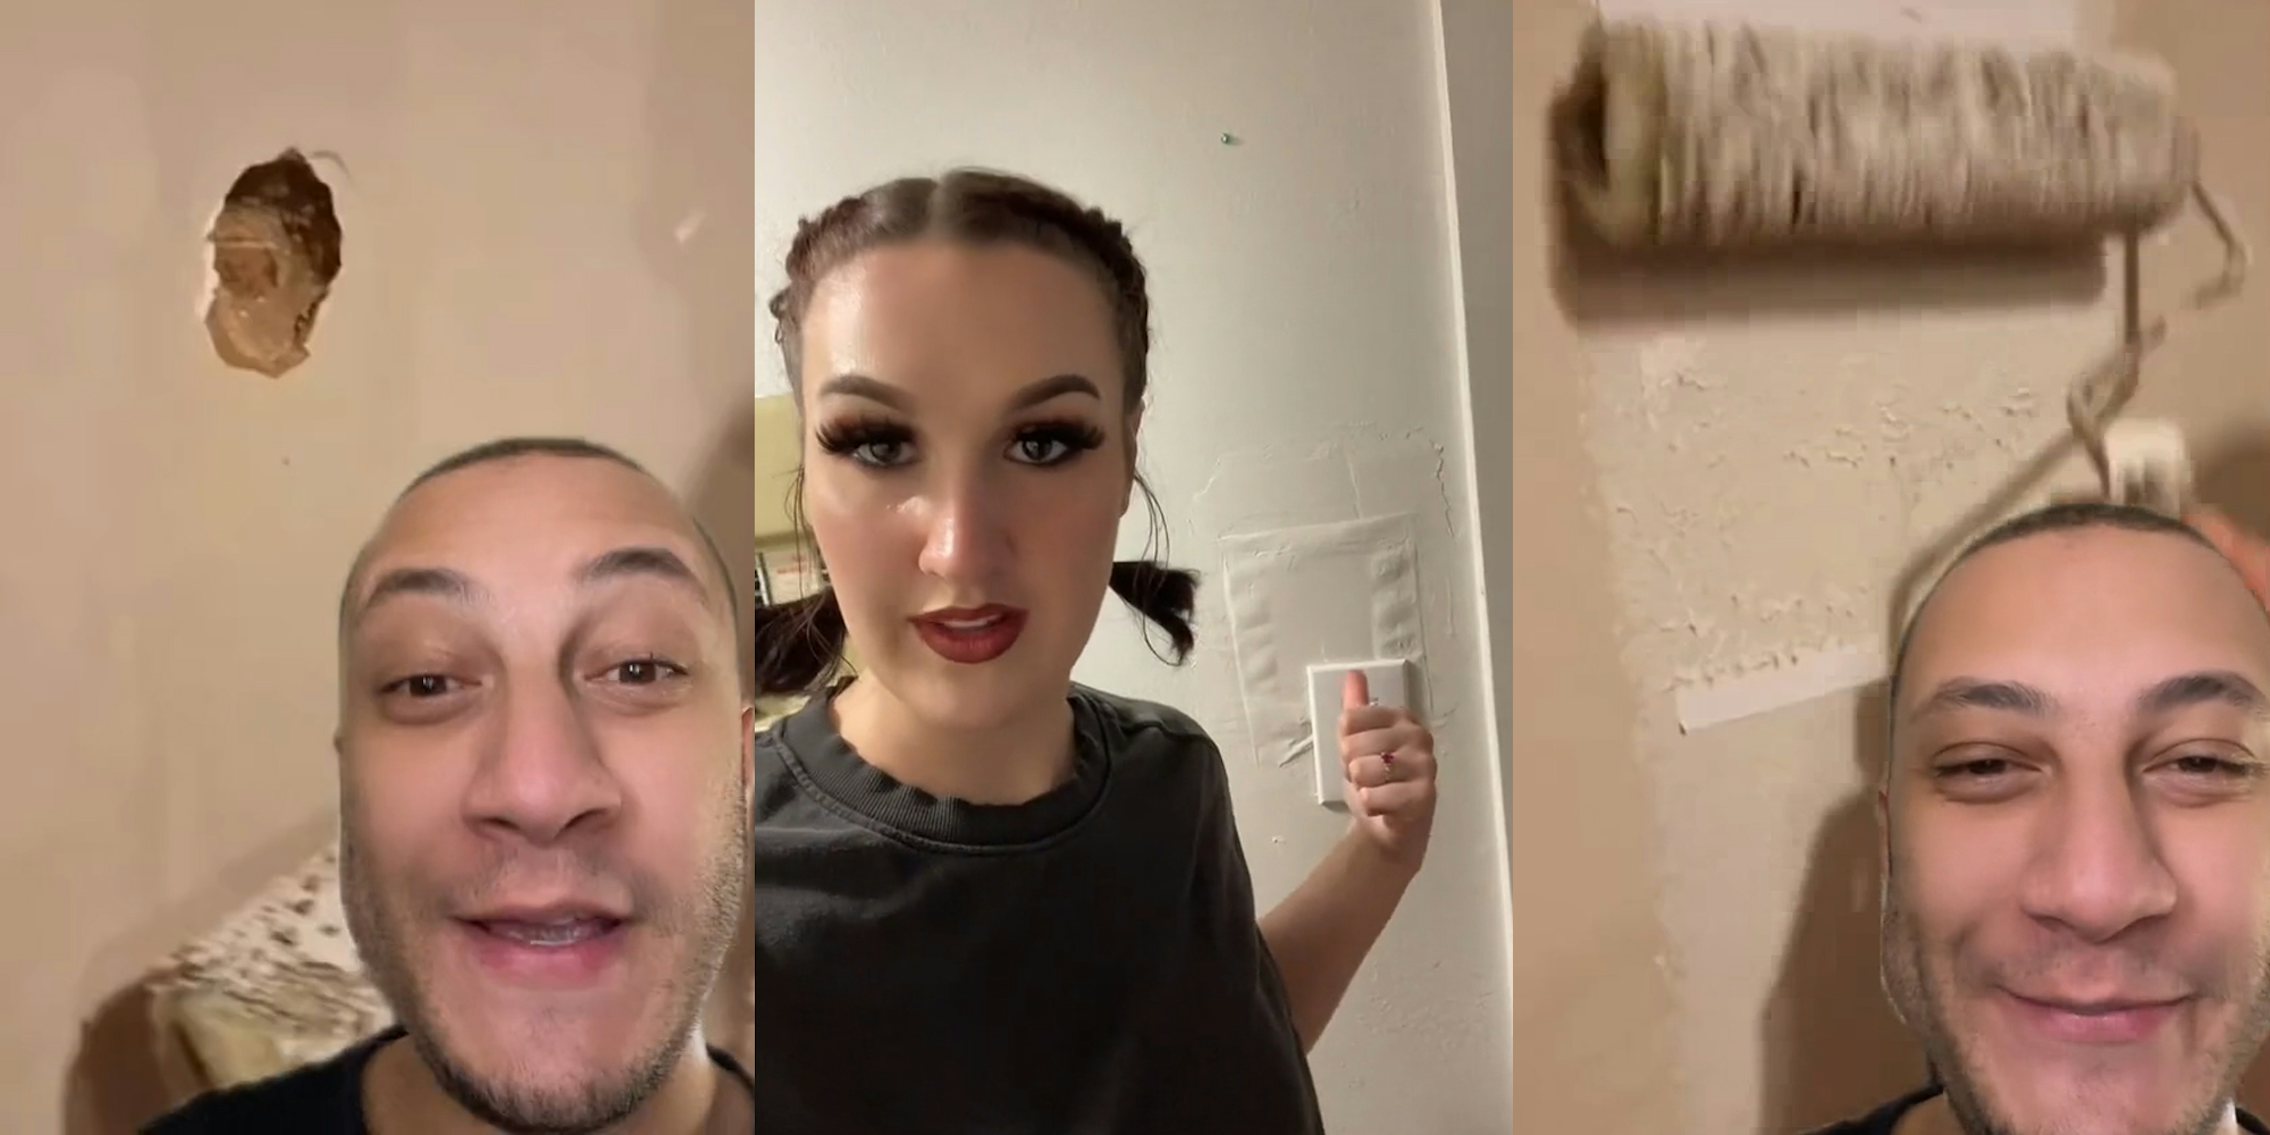 person greenscreen TikTok over image of hole in wall (l) person pointing to paper fix for wall above light switch (c) person greenscreen TikTok over image of hand using roller to paint over paper on wall (r)